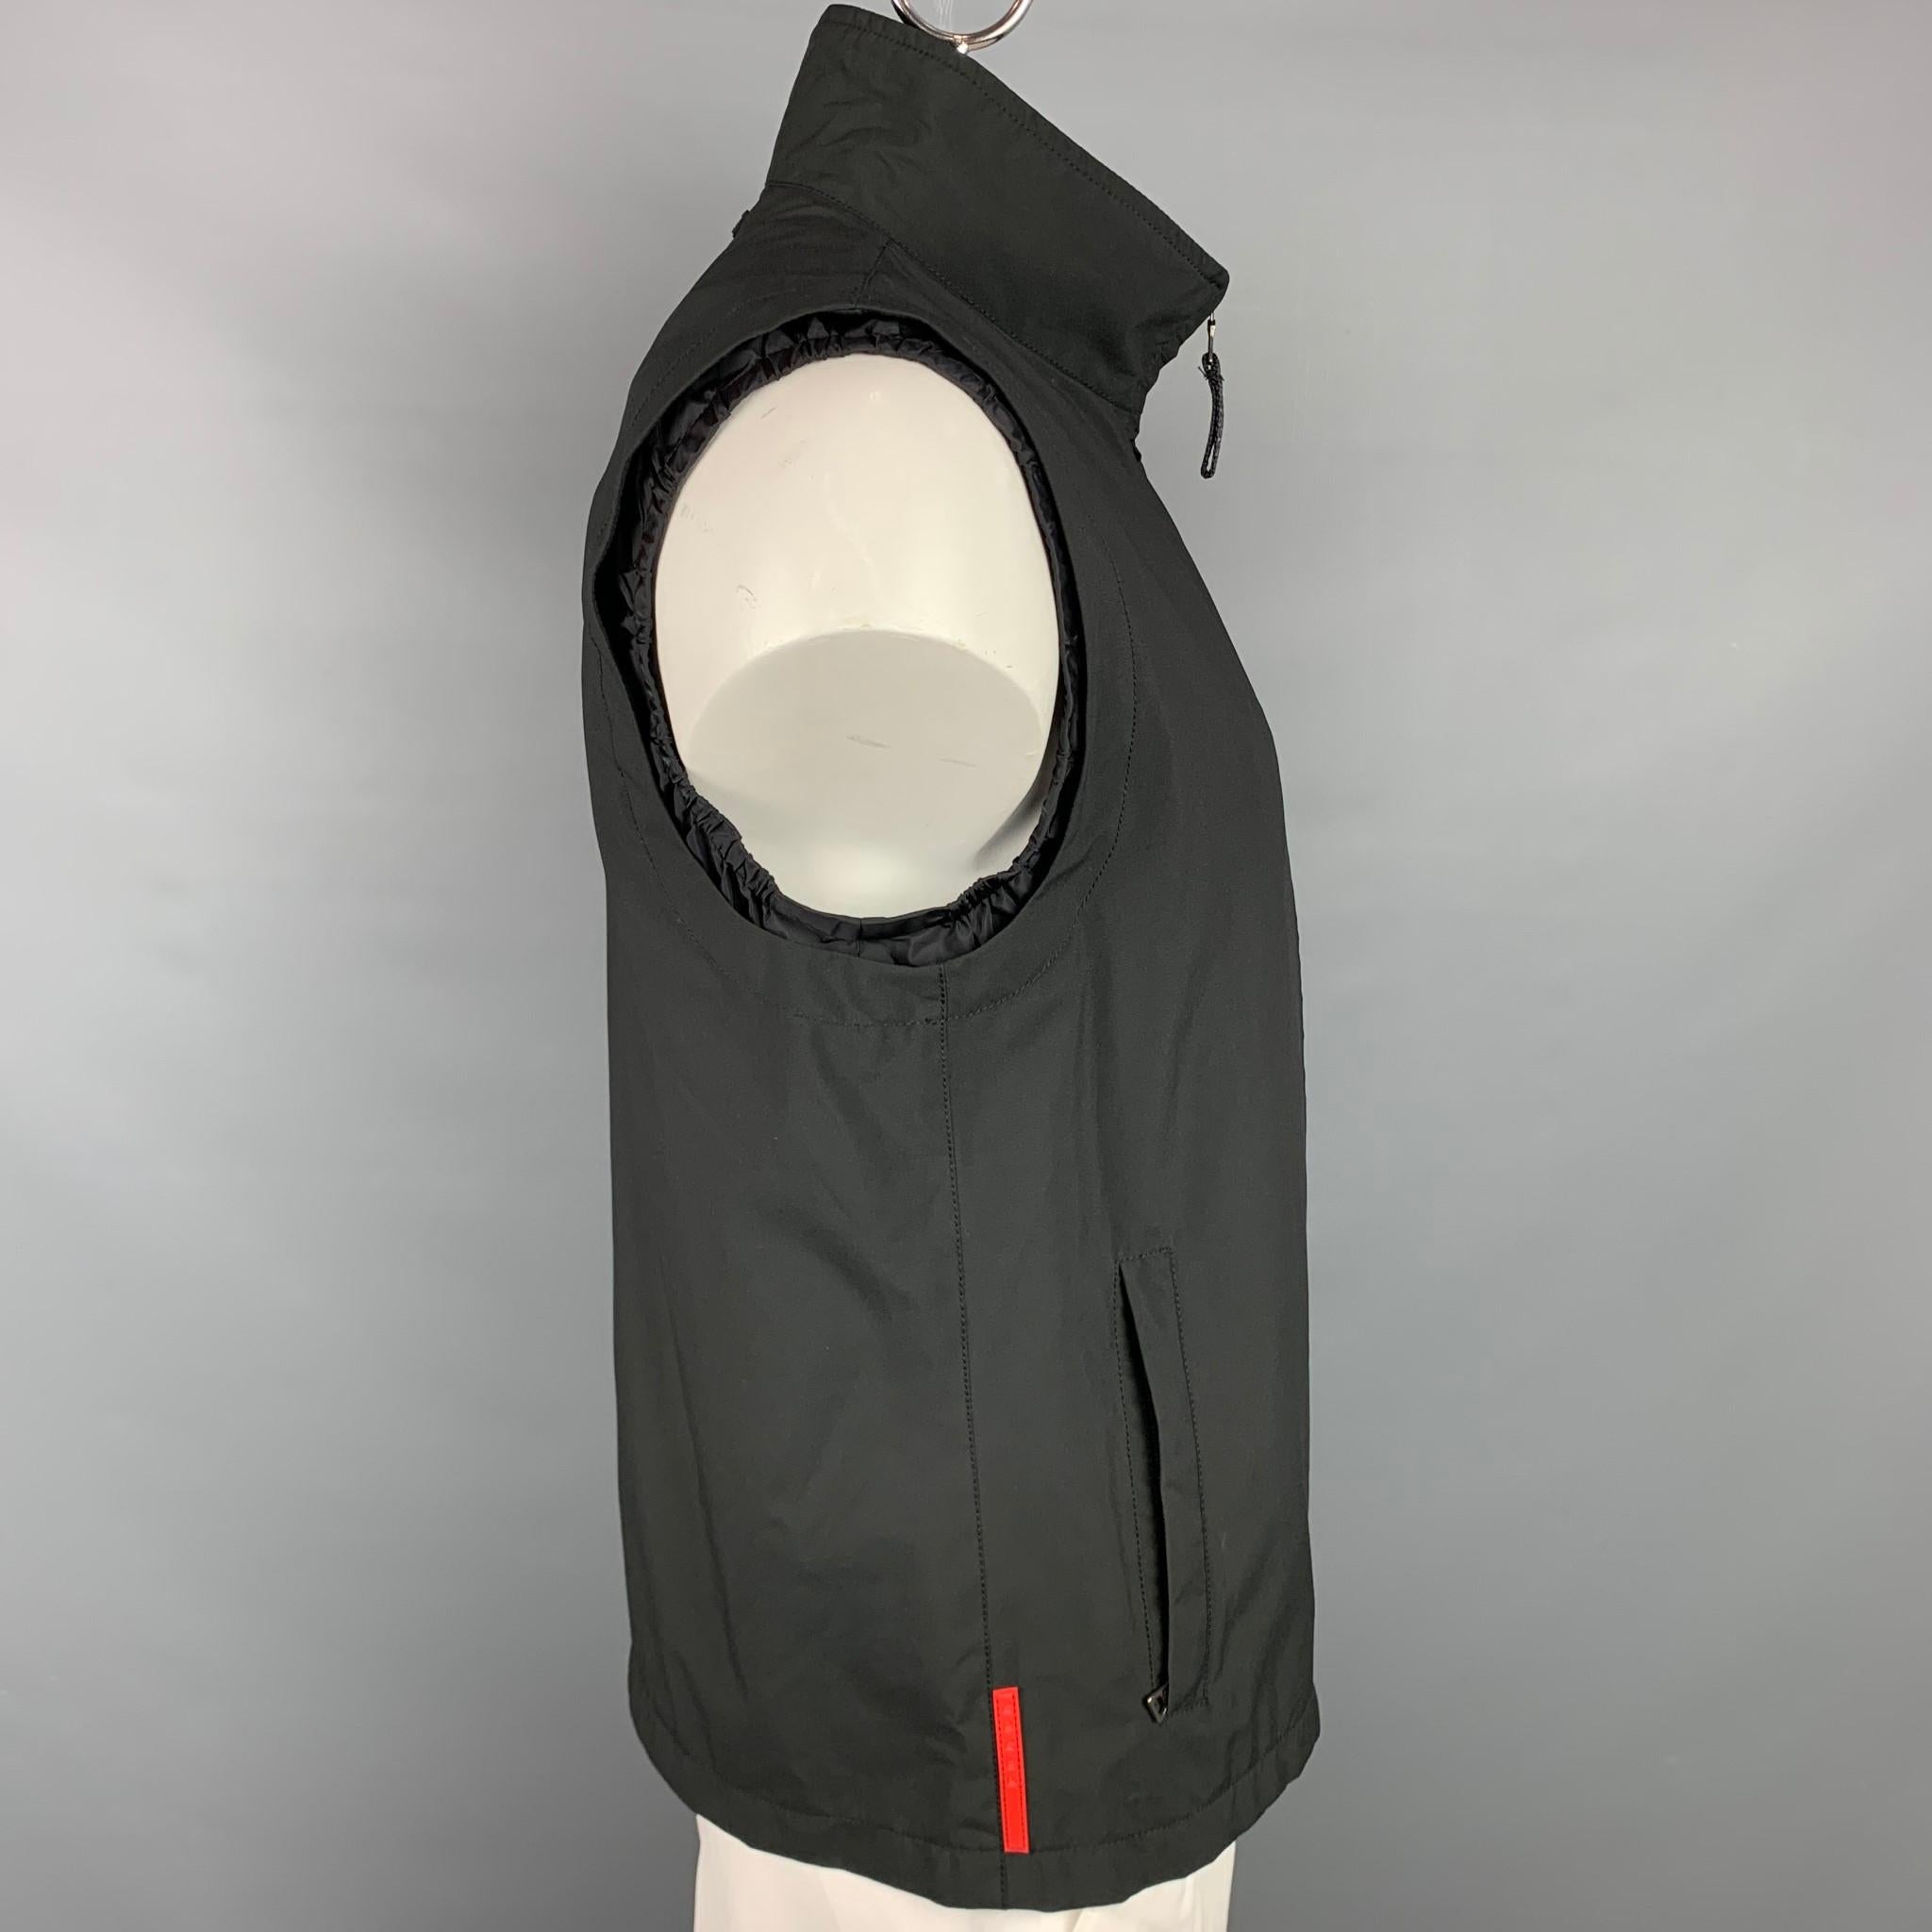 PRADA vest comes in a black polyester featuring a double layer design, zipper pockets, high collar, and a full zip up closure.

Good Pre-Owned Condition.
Marked: 54

Measurements:

Shoulder: 17.5 in.
Chest: 44 in.
Length: 27 in. 

SKU: